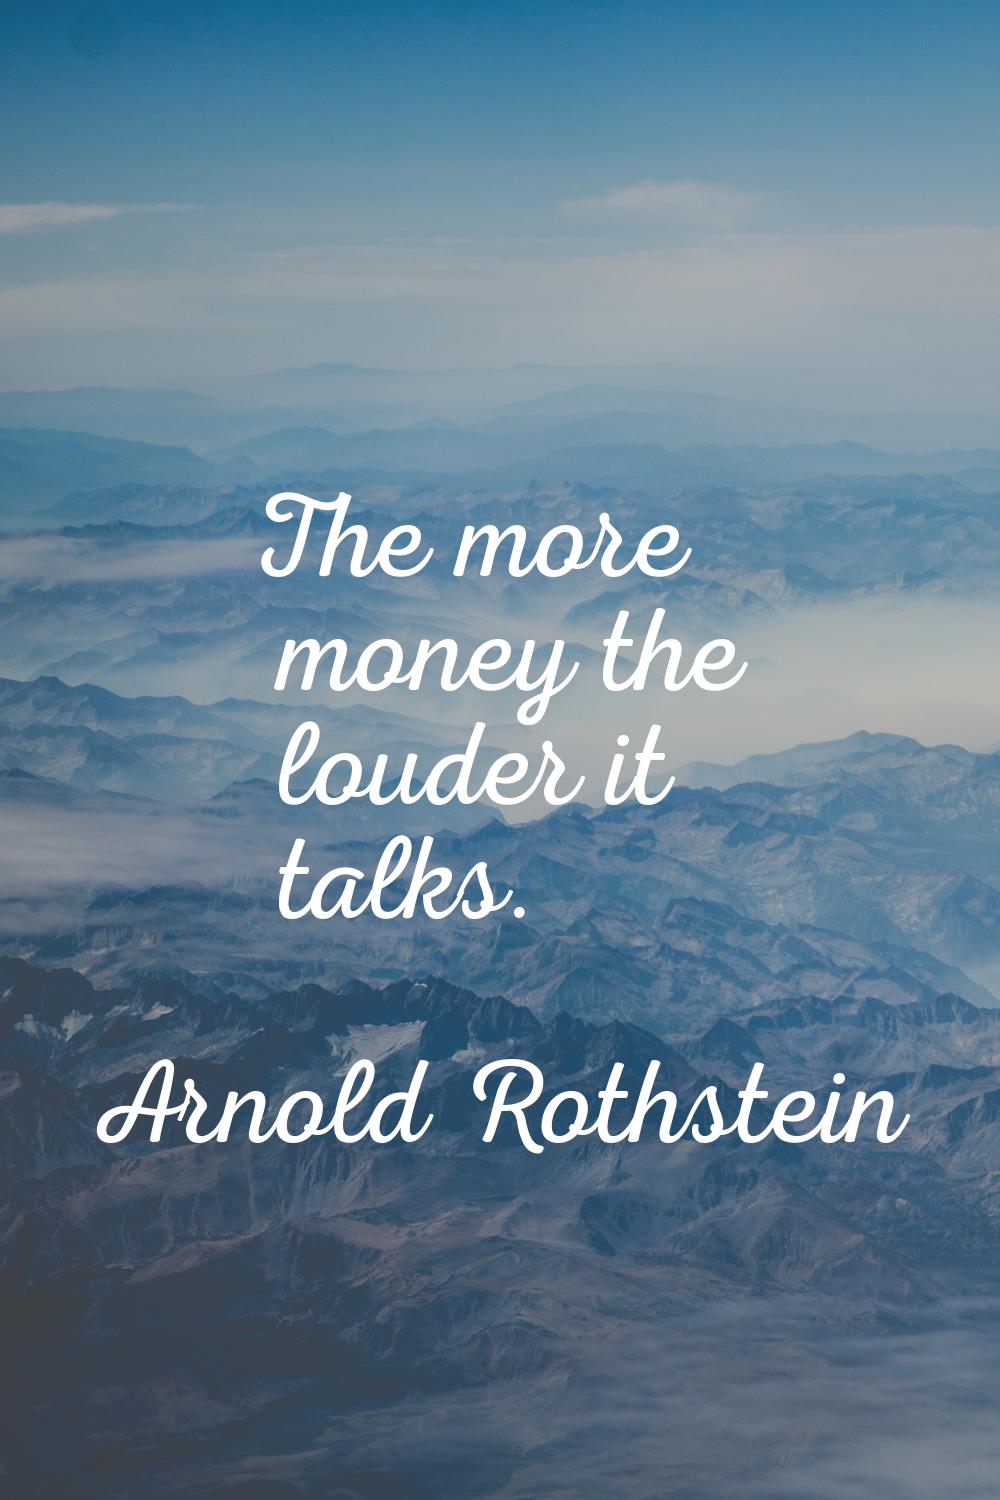 The more money the louder it talks.